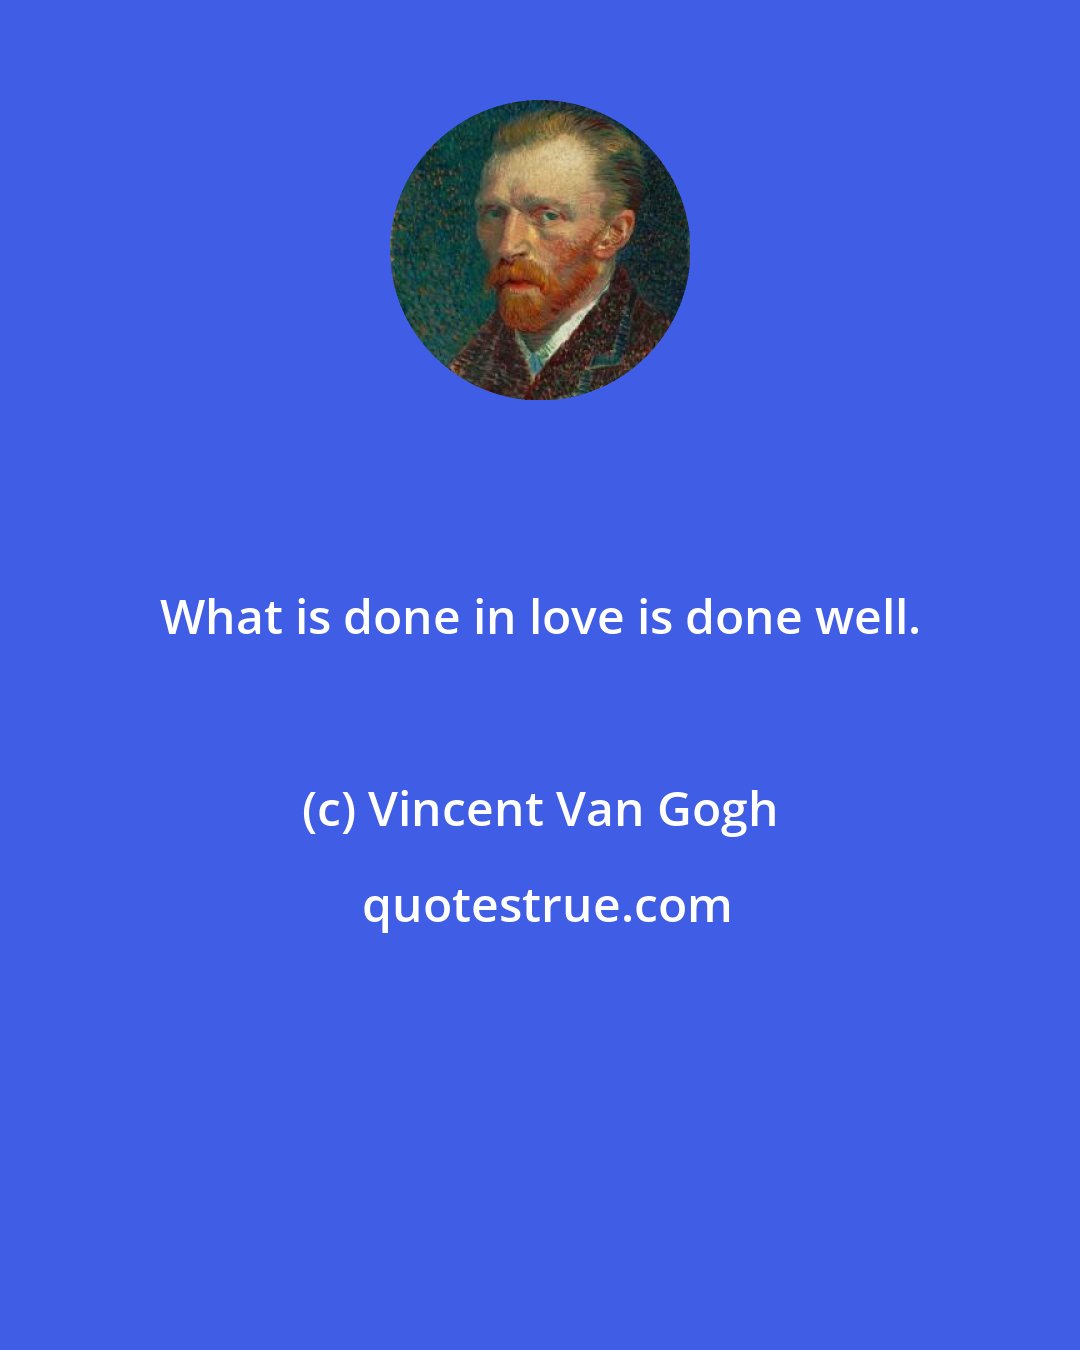 Vincent Van Gogh: What is done in love is done well.